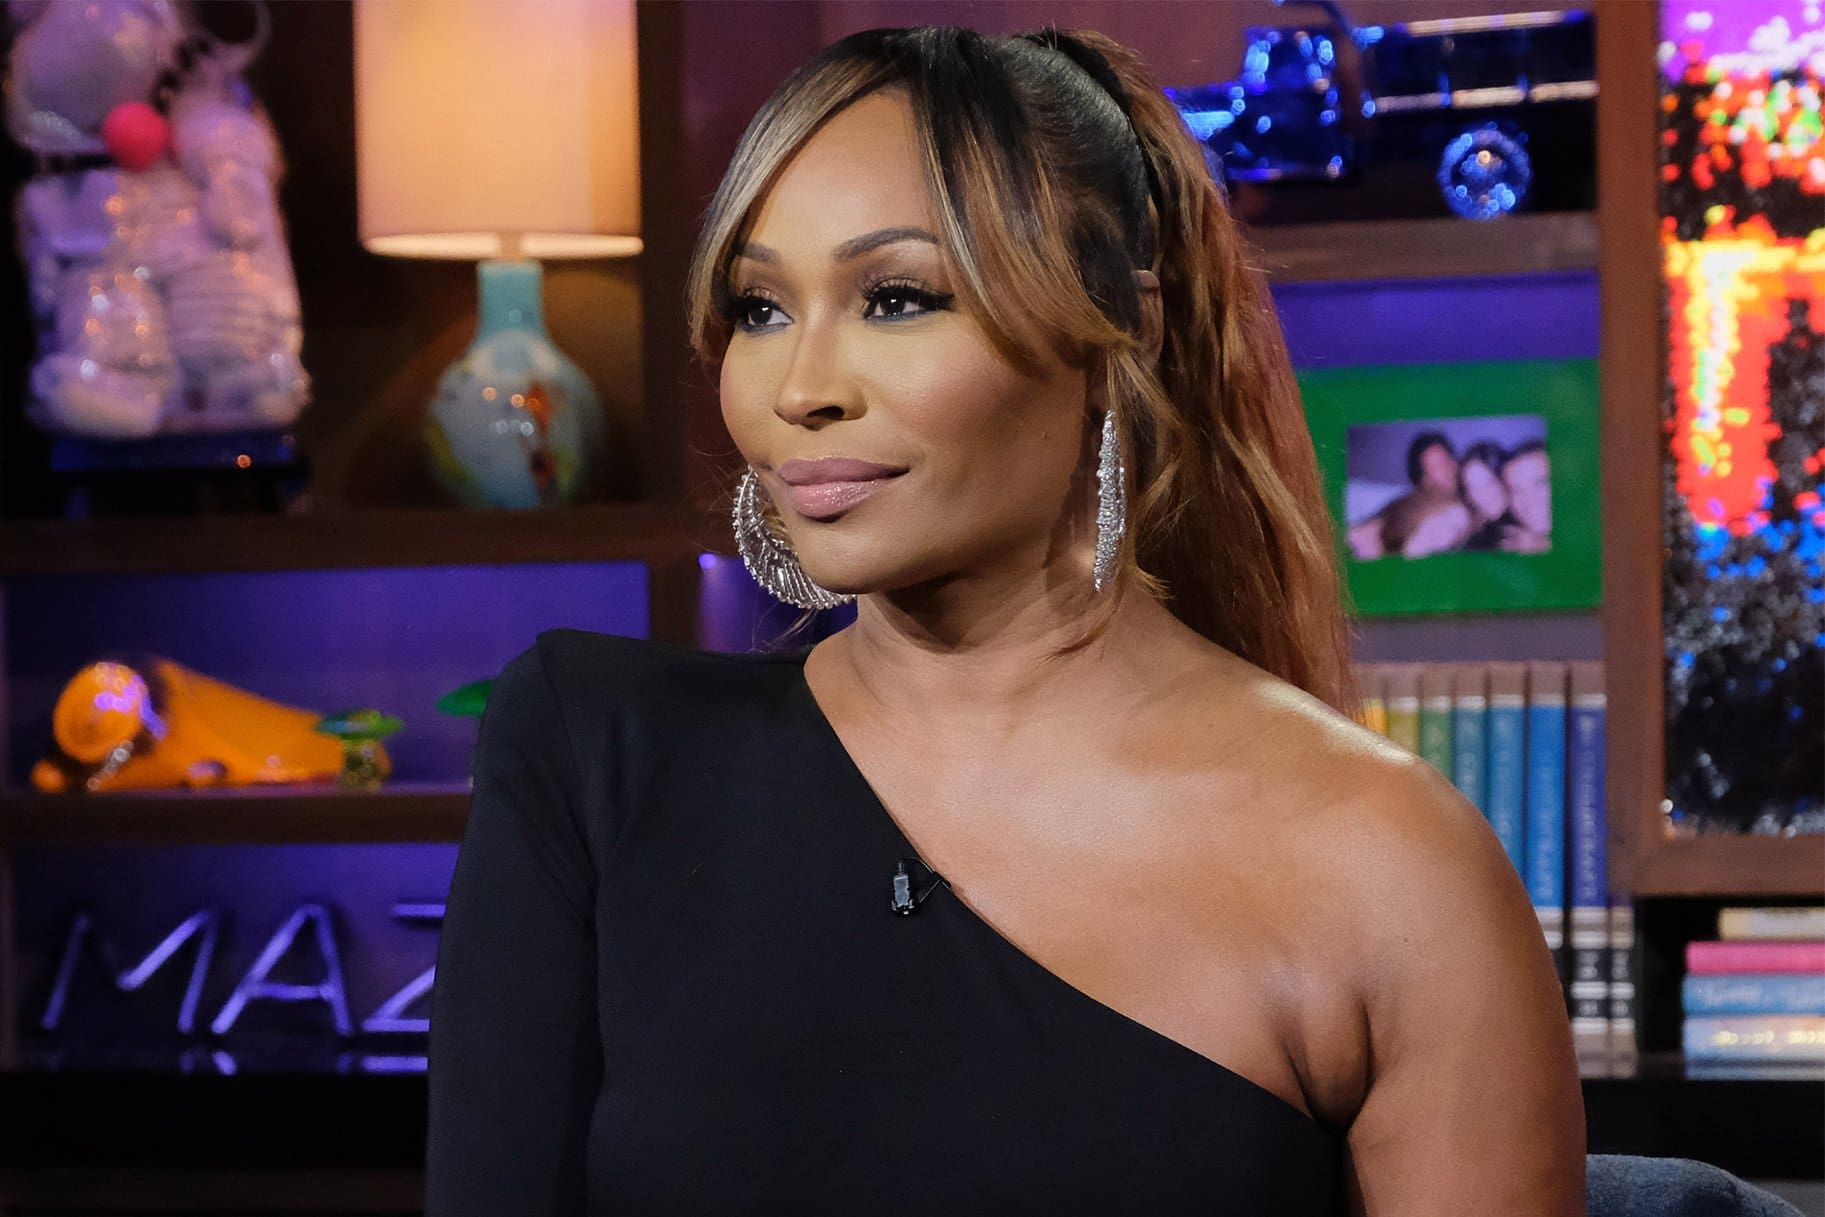 Cynthia Bailey Looks Gorgeous In This All-Black Outfit - See Her Photo